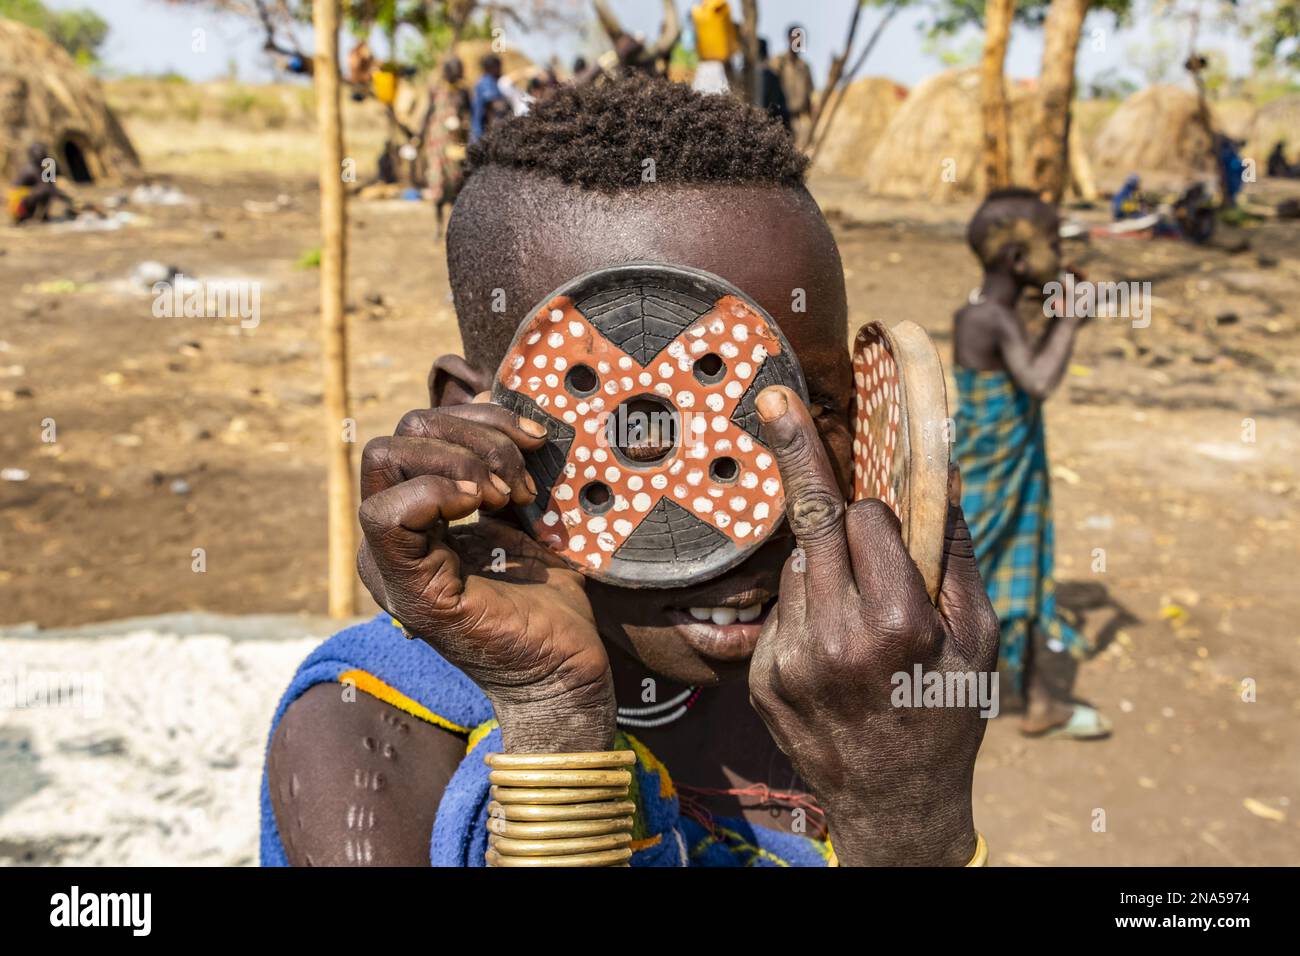 Mursi boy showing a lip plate in a village in Mago National Park; Omo Valley, Ethiopia Stock Photo